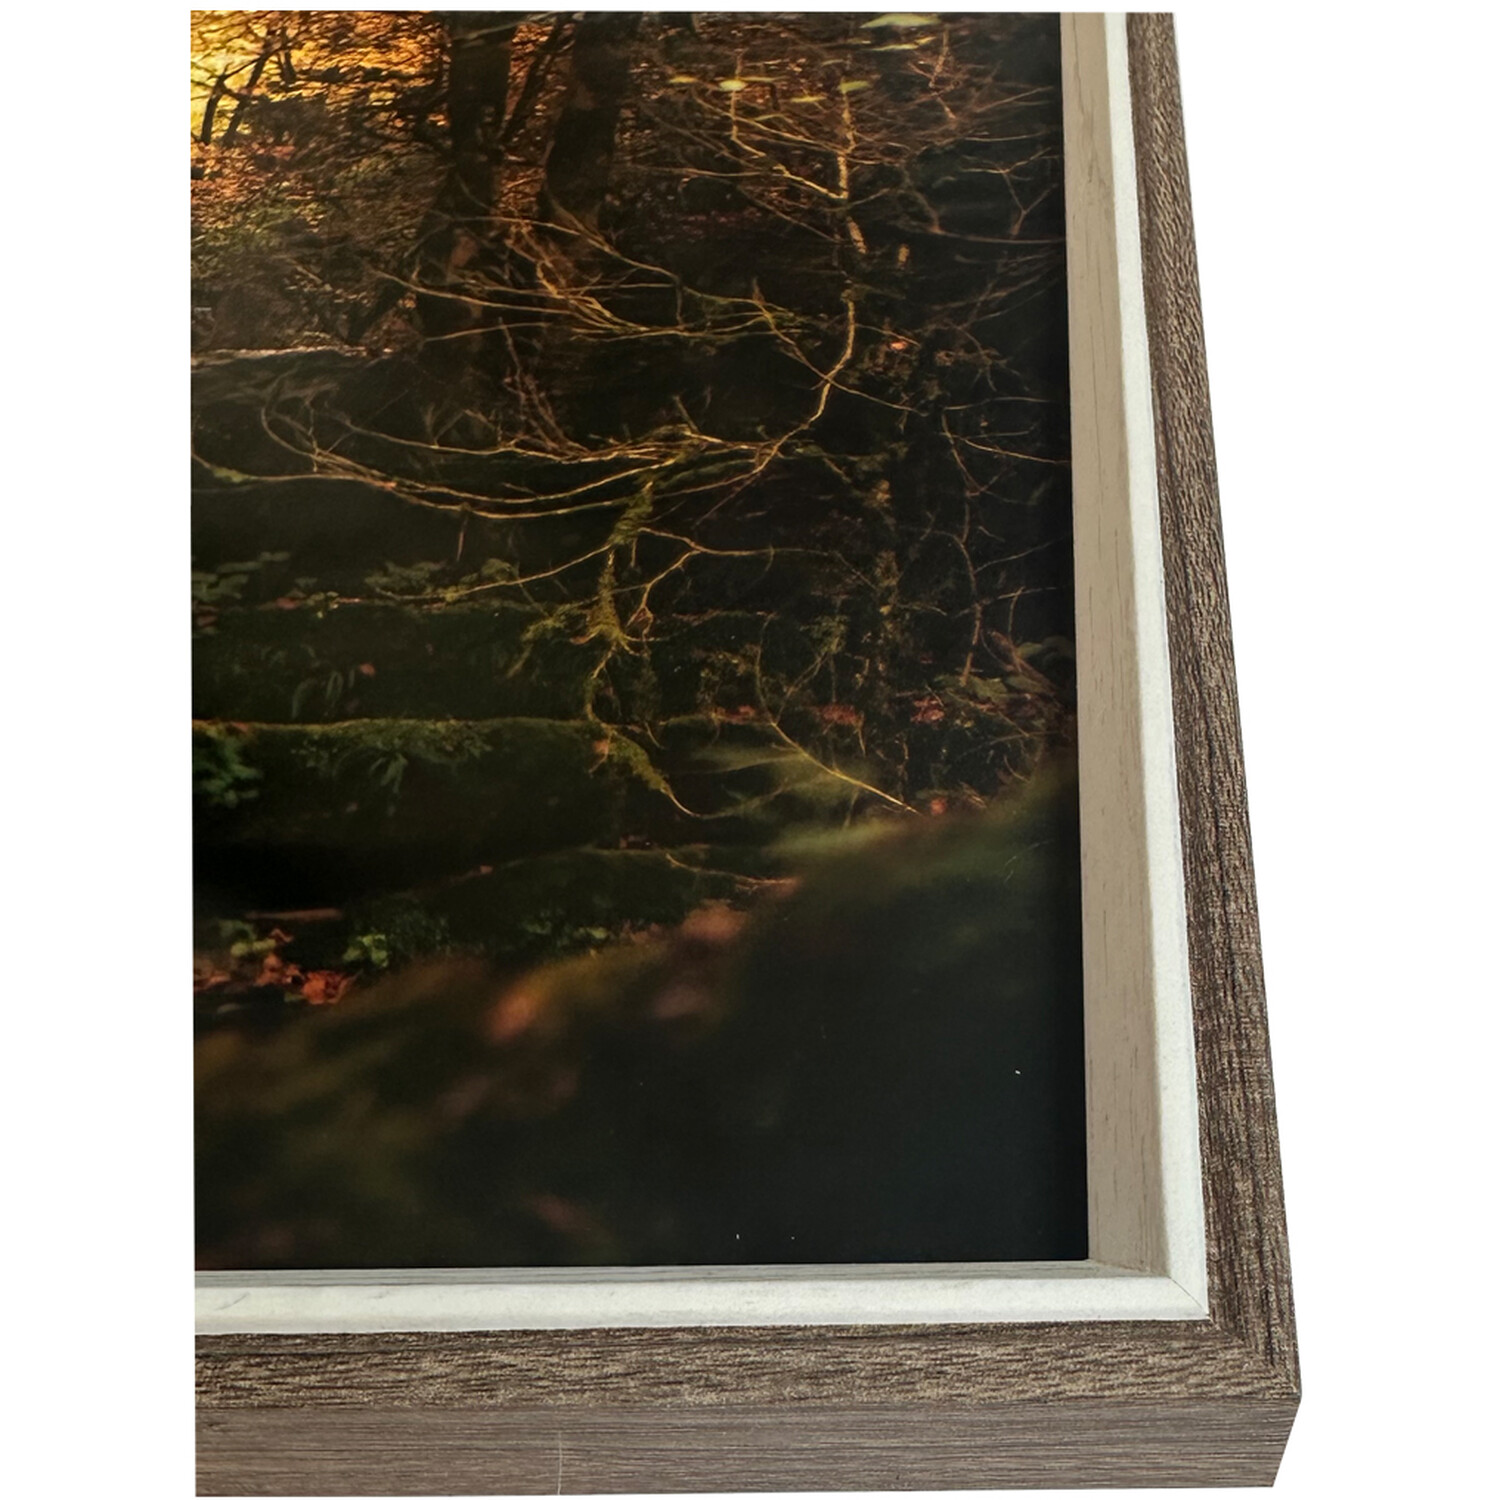 Zoey Rustic Wood Effect Frame - Brown / 14x11in Image 3